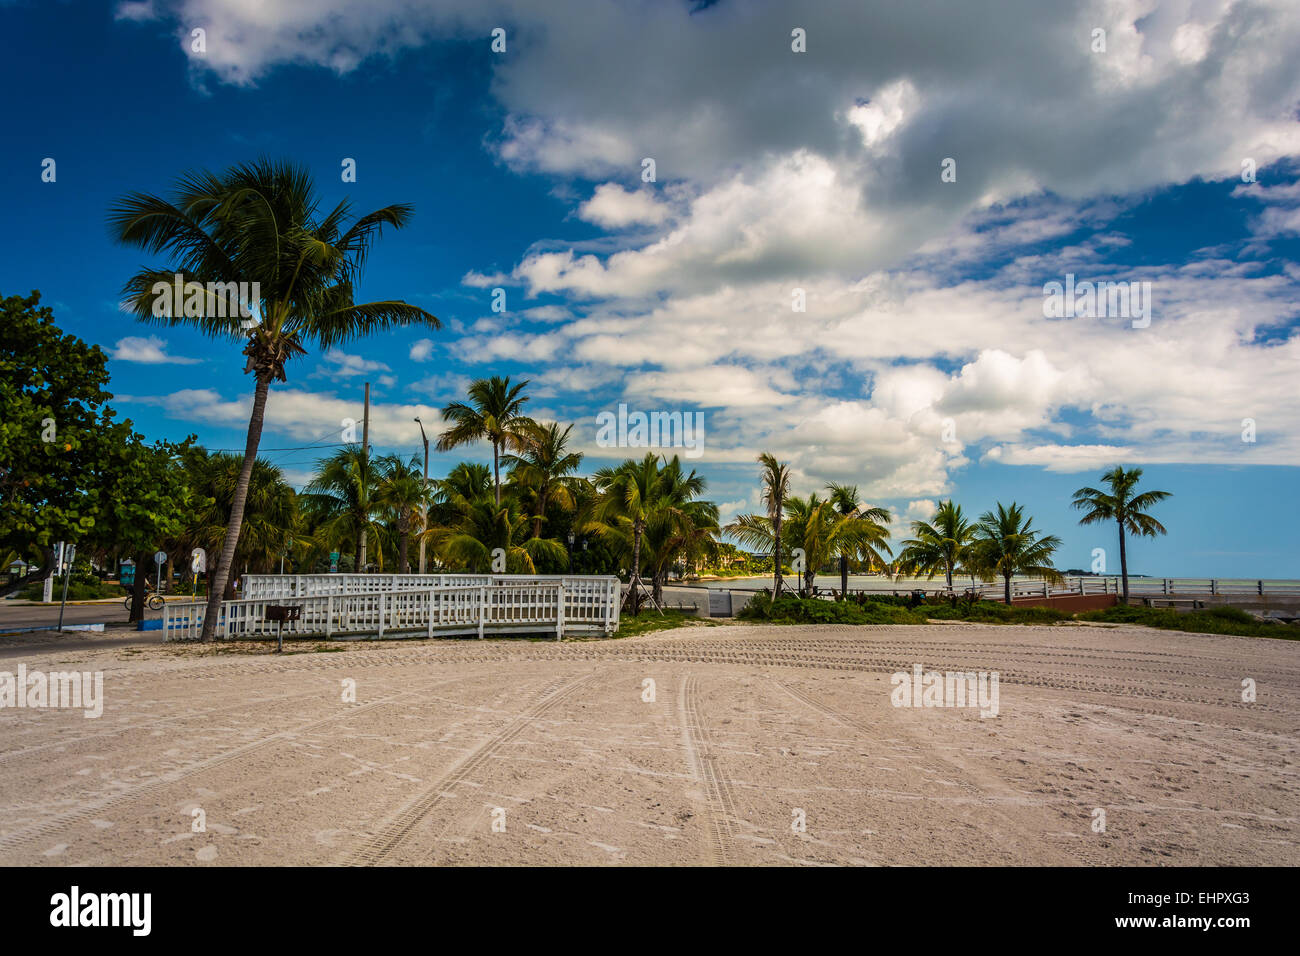 Palm trees at Higgs Beach, Key West, Florida. Stock Photo